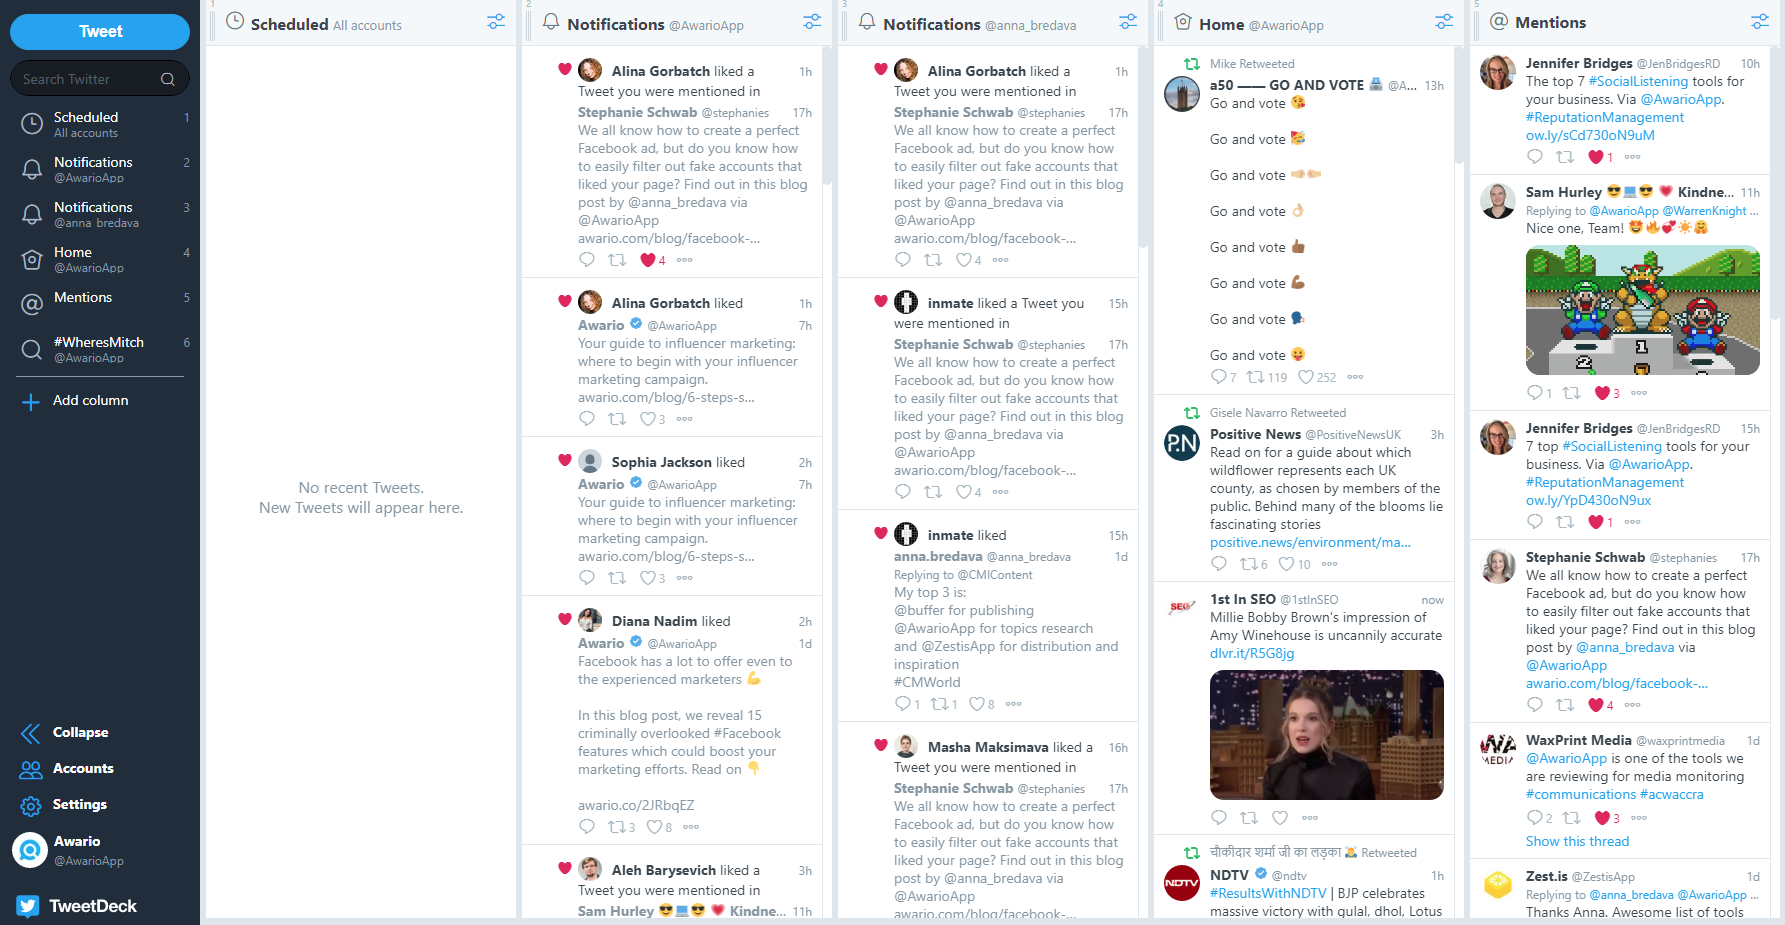 Your feed and mentions in Tweetdeck